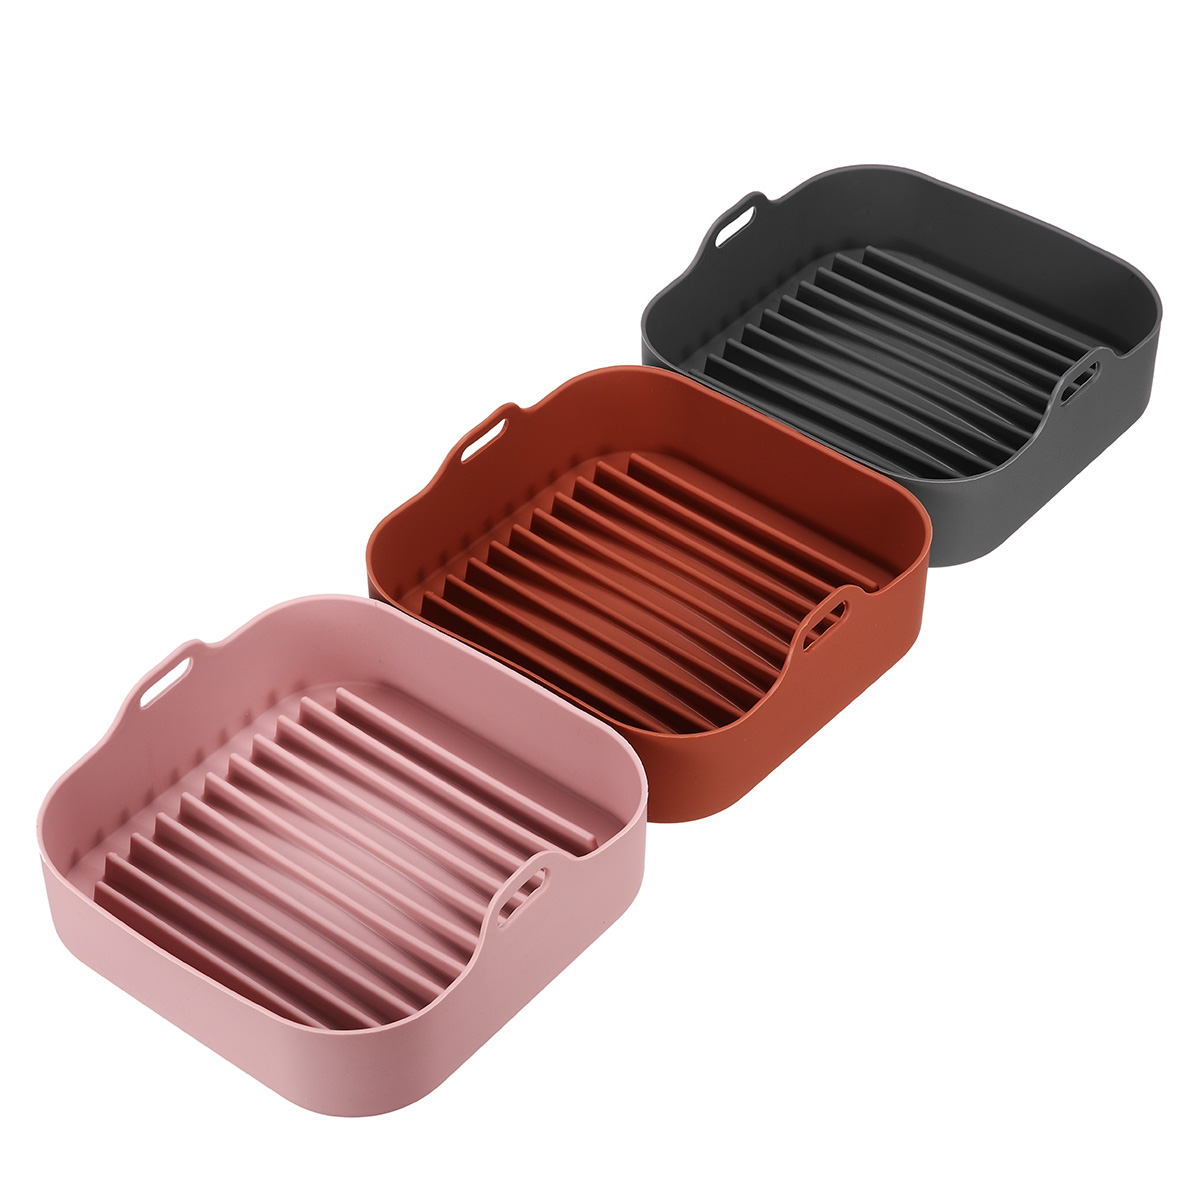 Multifunctional-Silicone-Baking-Tray-High-Temperature-Resistant-Non-stick-Bread-Fried-Baking-Pan-wit-1864776-10